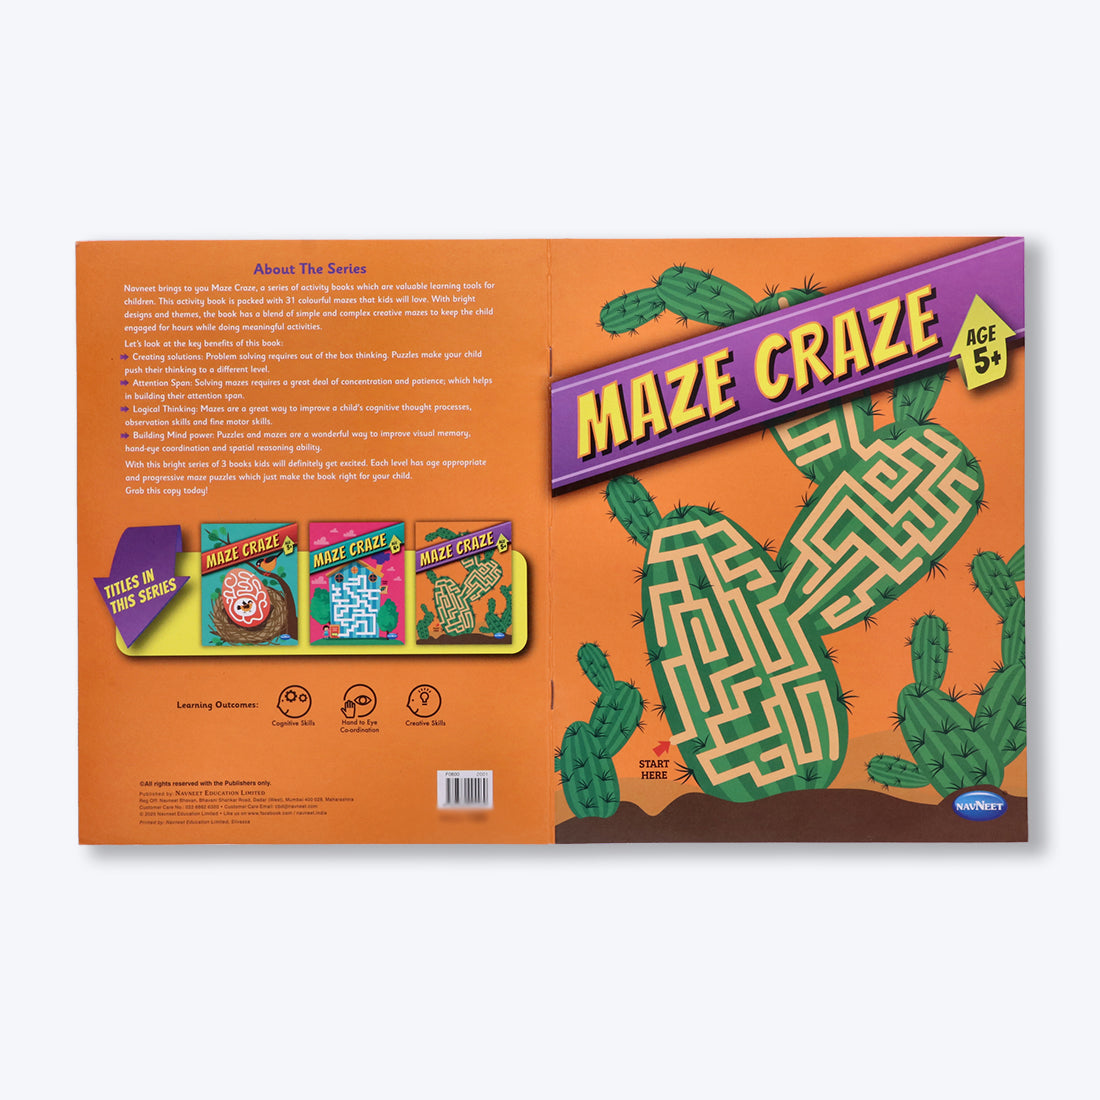 Navneet Maze Craze and Hidden Picture for 5+ age set of 2 books packed with activities